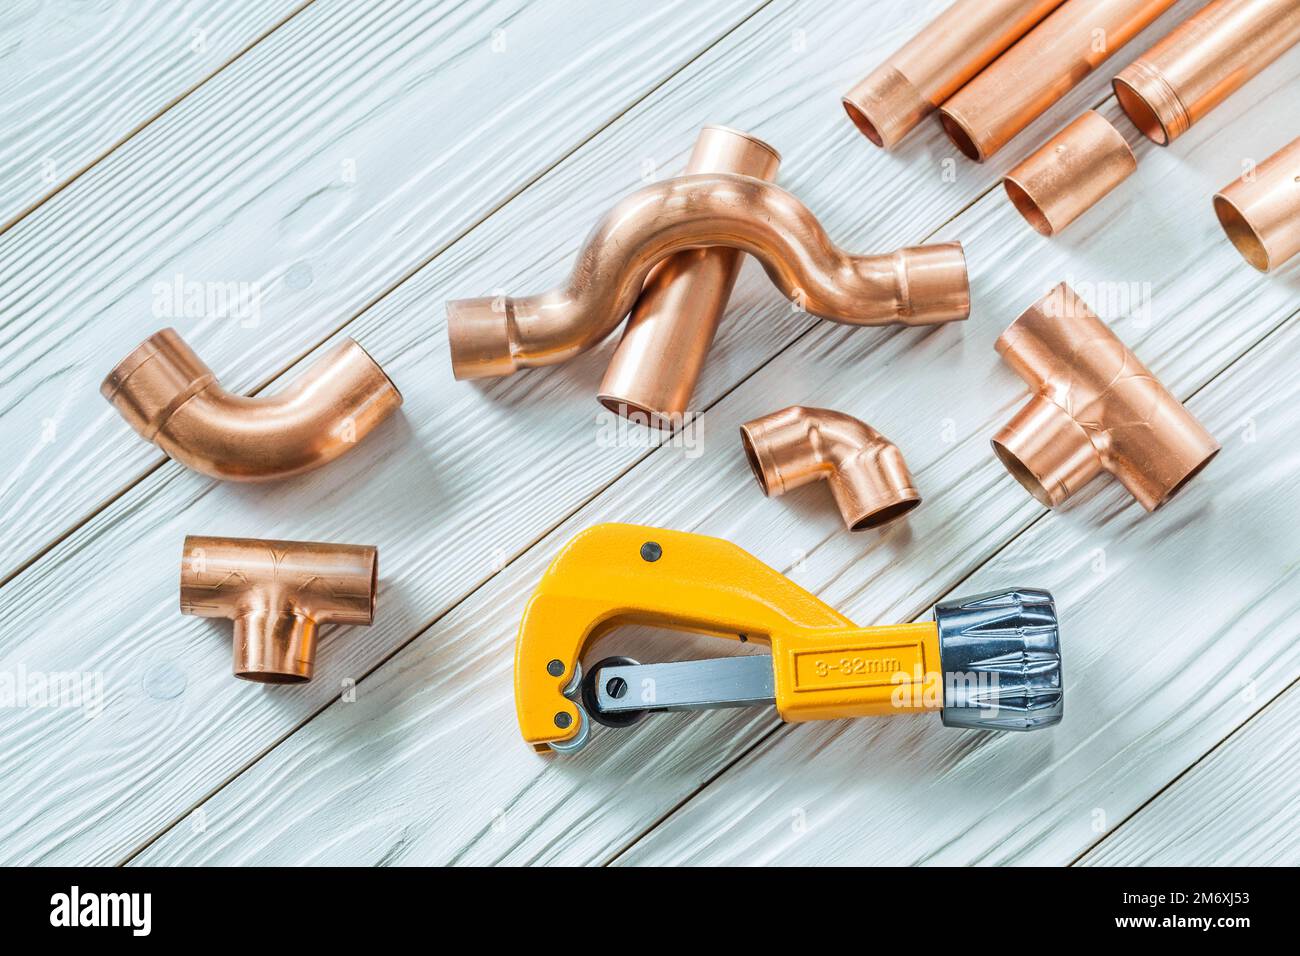 copper pipes and fittings pipecutter on white boards Stock Photo